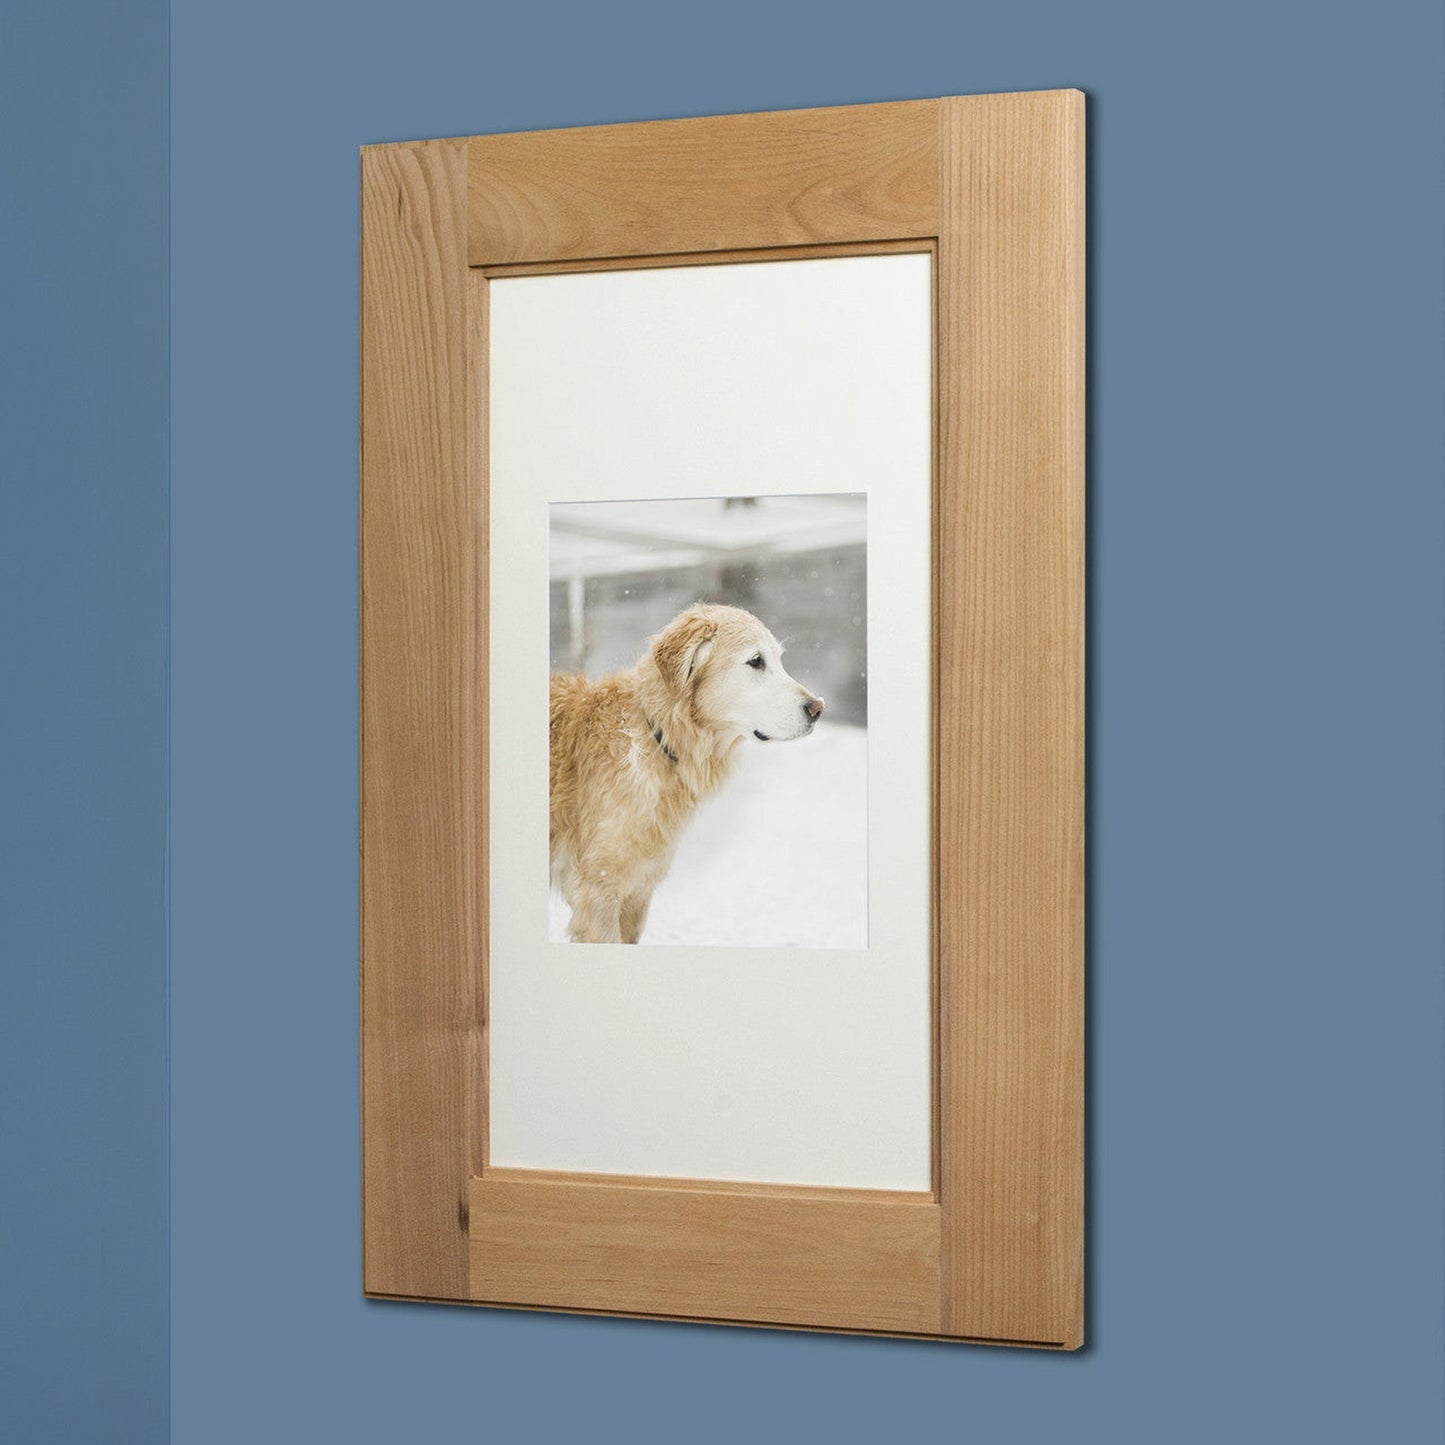 Fox Hollow Furnishings 14" x 24" Extra Large Unfinished Standard 4" Depth White Interior Recessed Picture Frame Medicine Cabinet With Mirror and White 5" x 7" Three Opening Matting